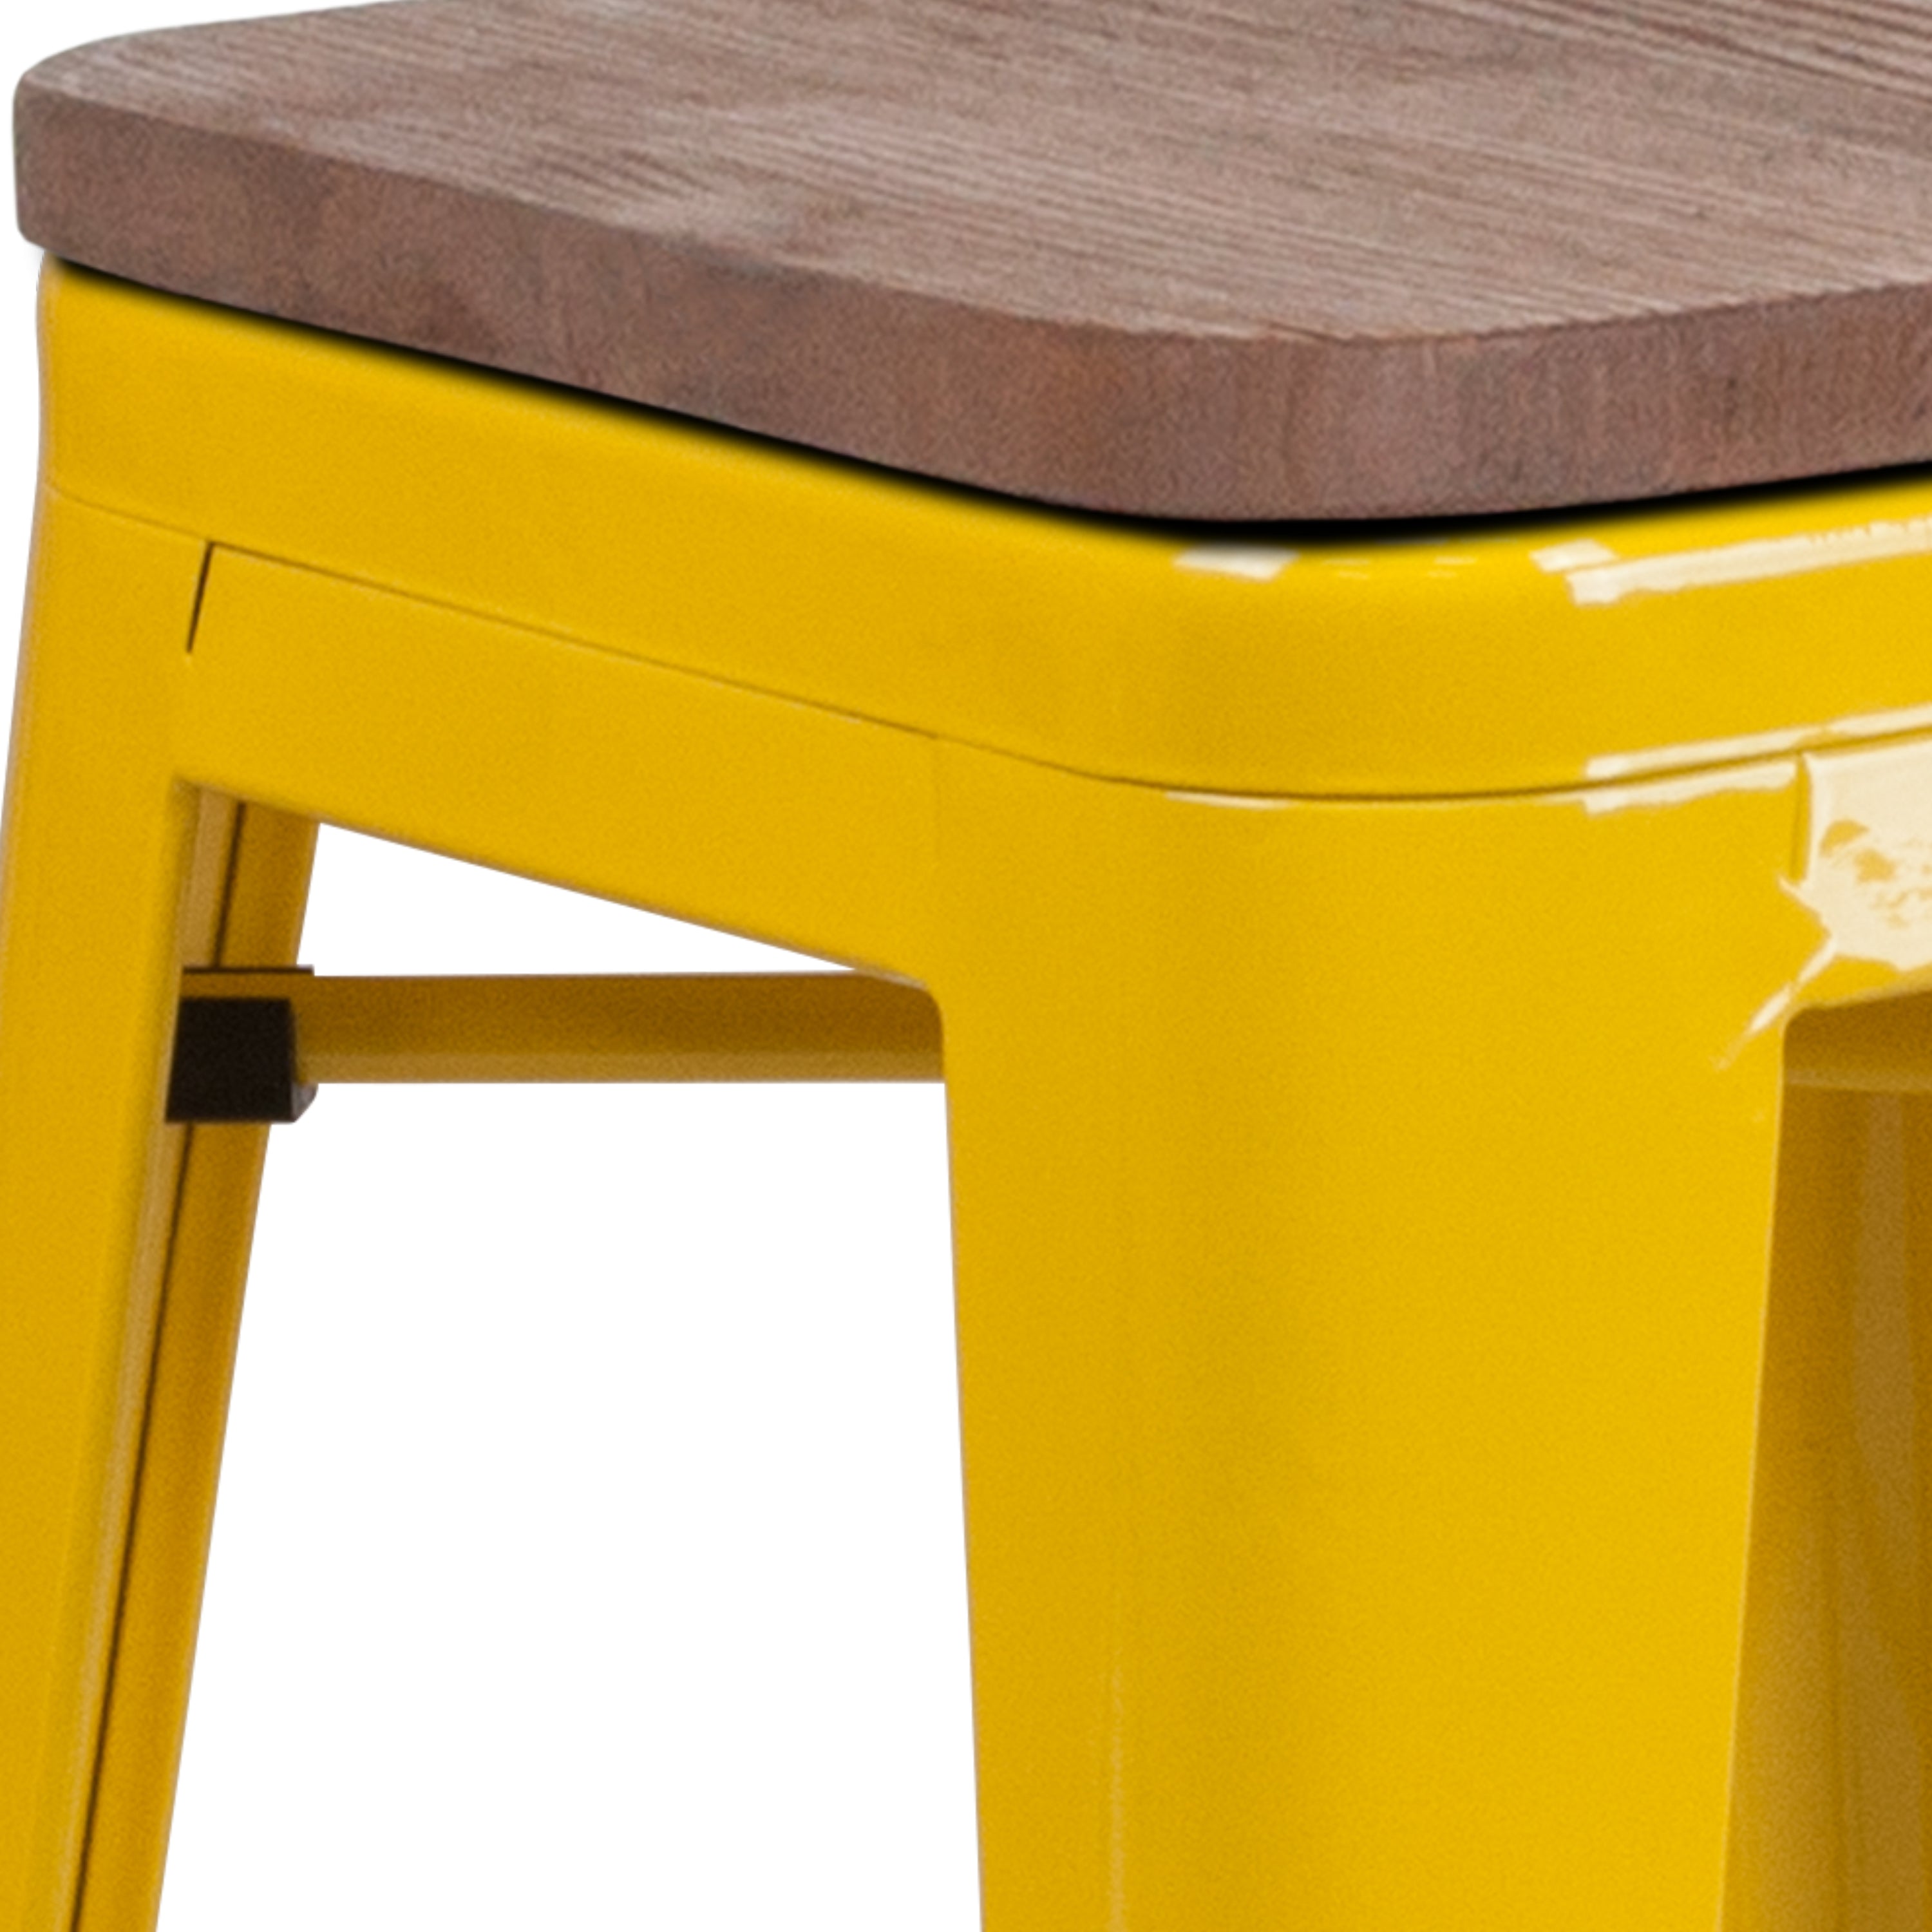 24" High Backless Metal Counter Height Stool with Square Wood Seat-Metal/ Colorful Restaurant Counter Stool-Flash Furniture-Wall2Wall Furnishings